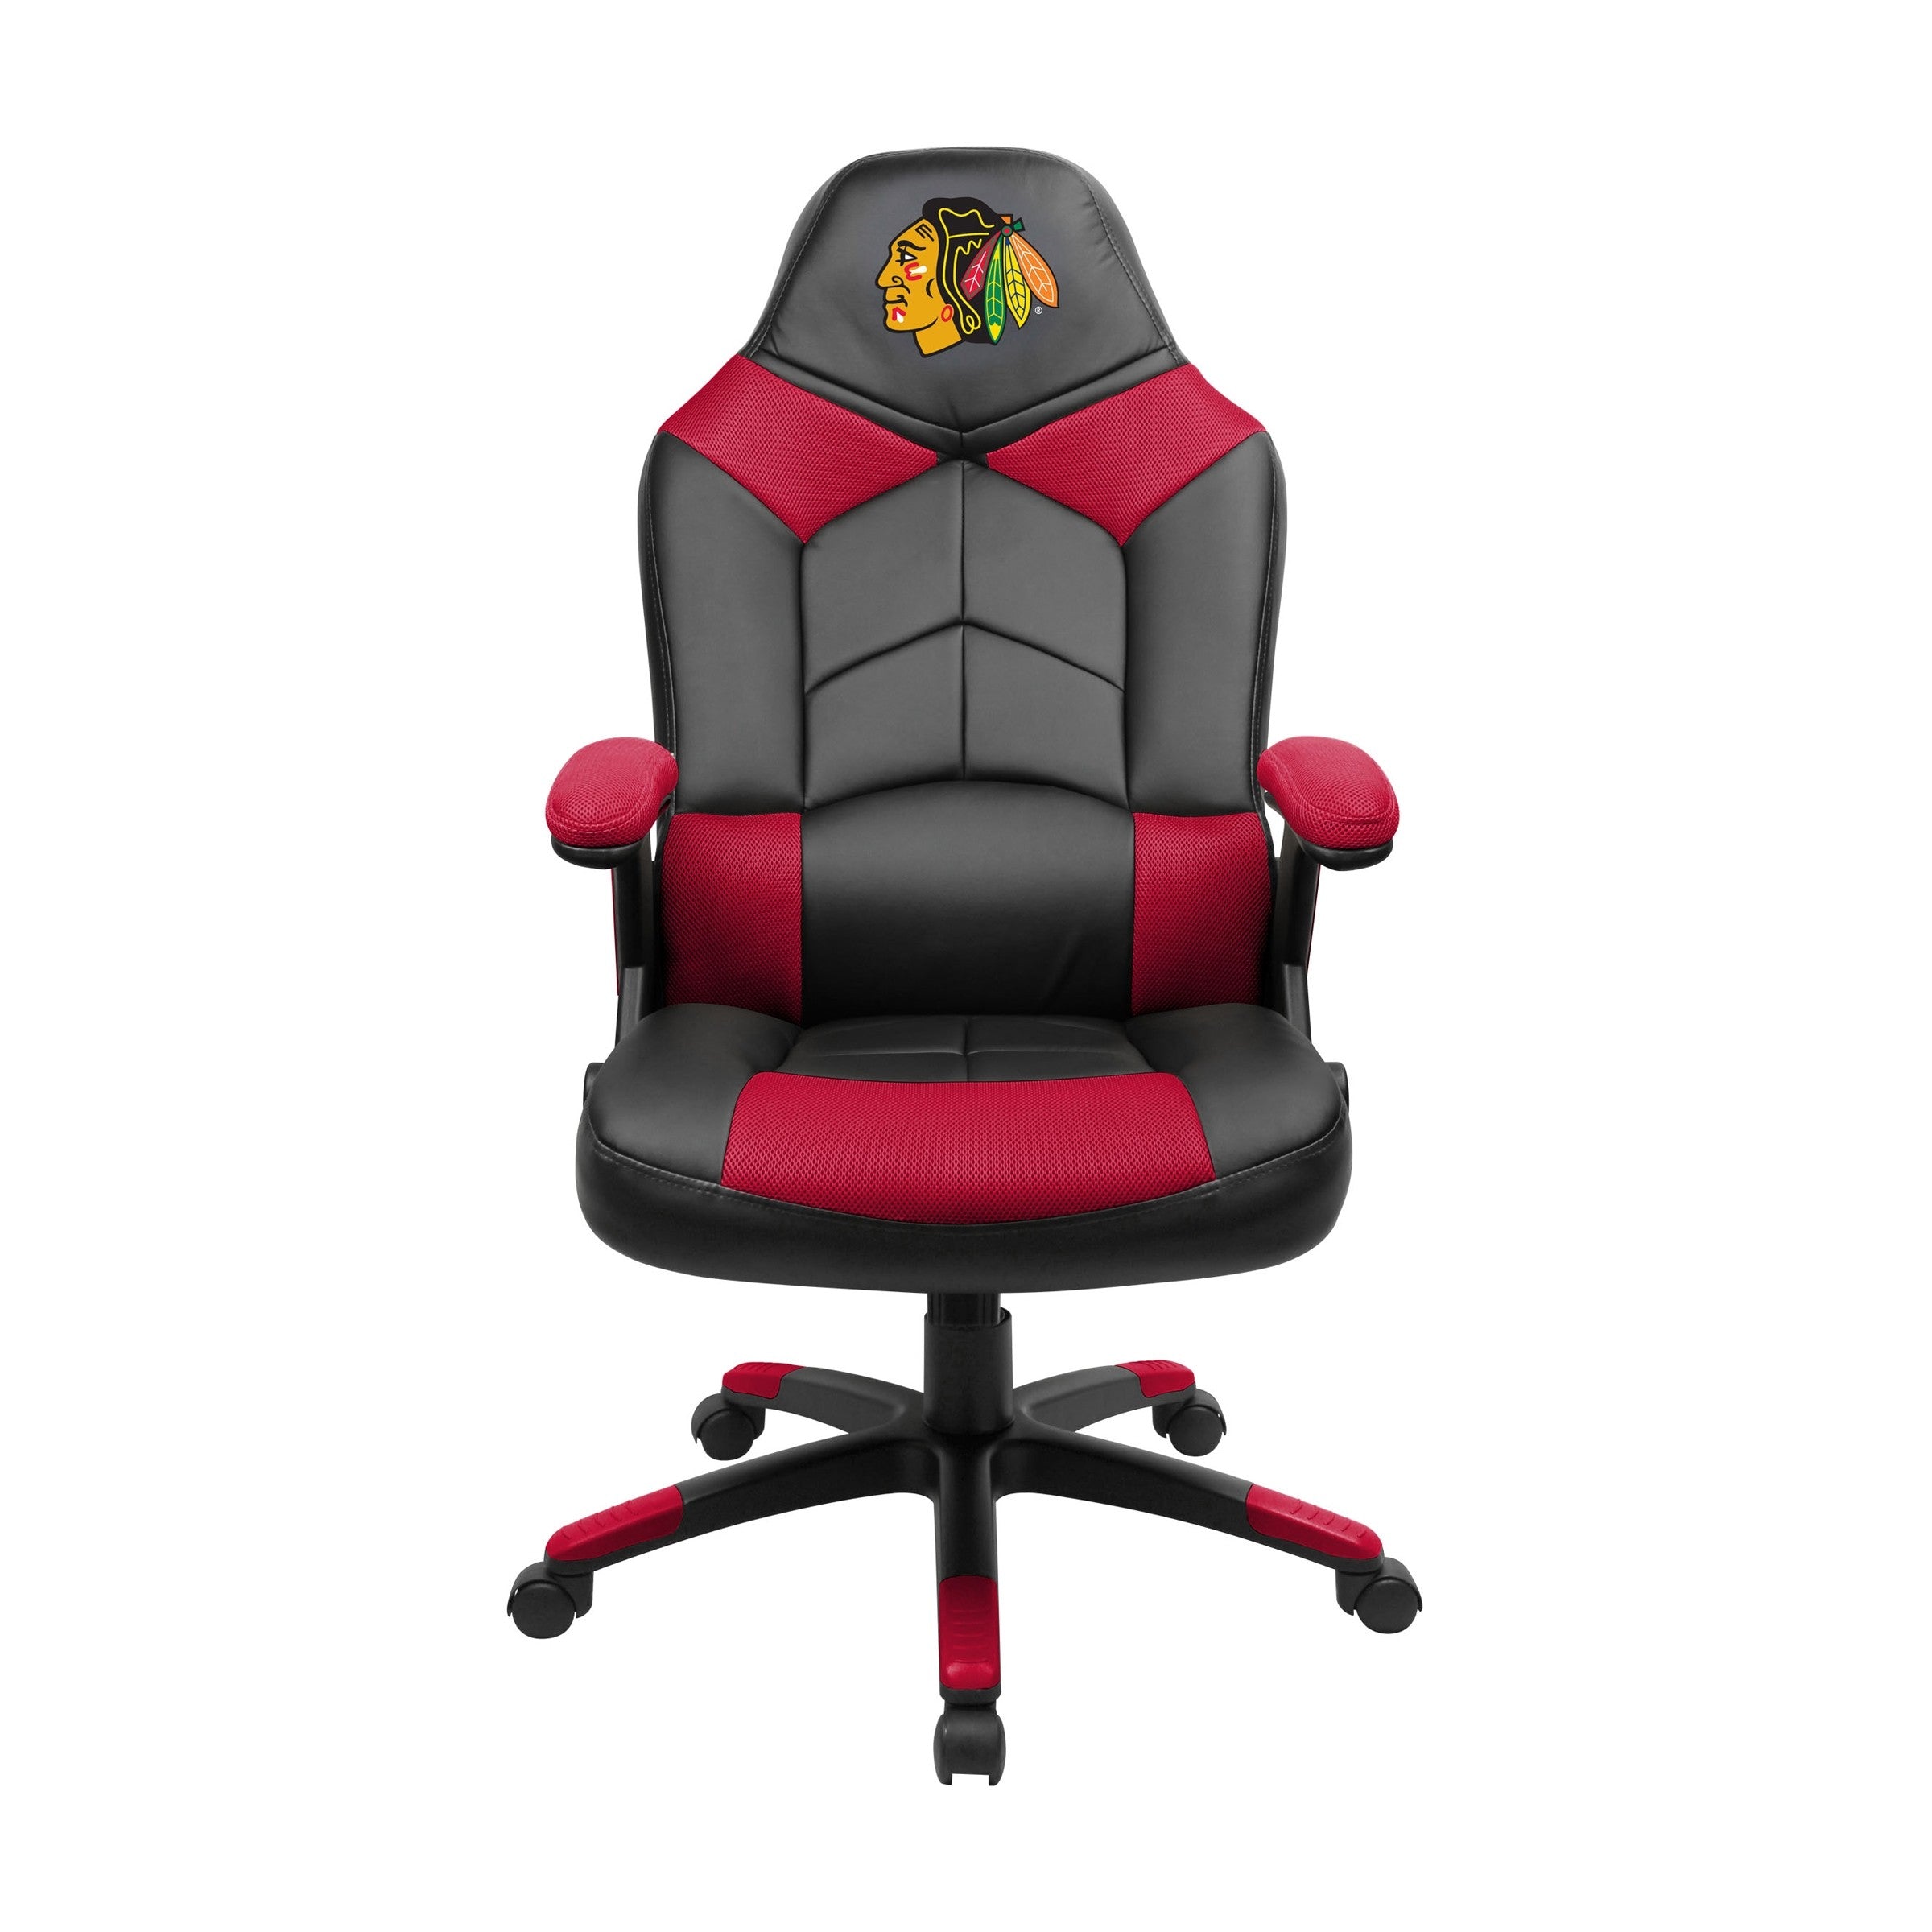 Imperial Chicago Blackhawks Oversized Gaming Chair